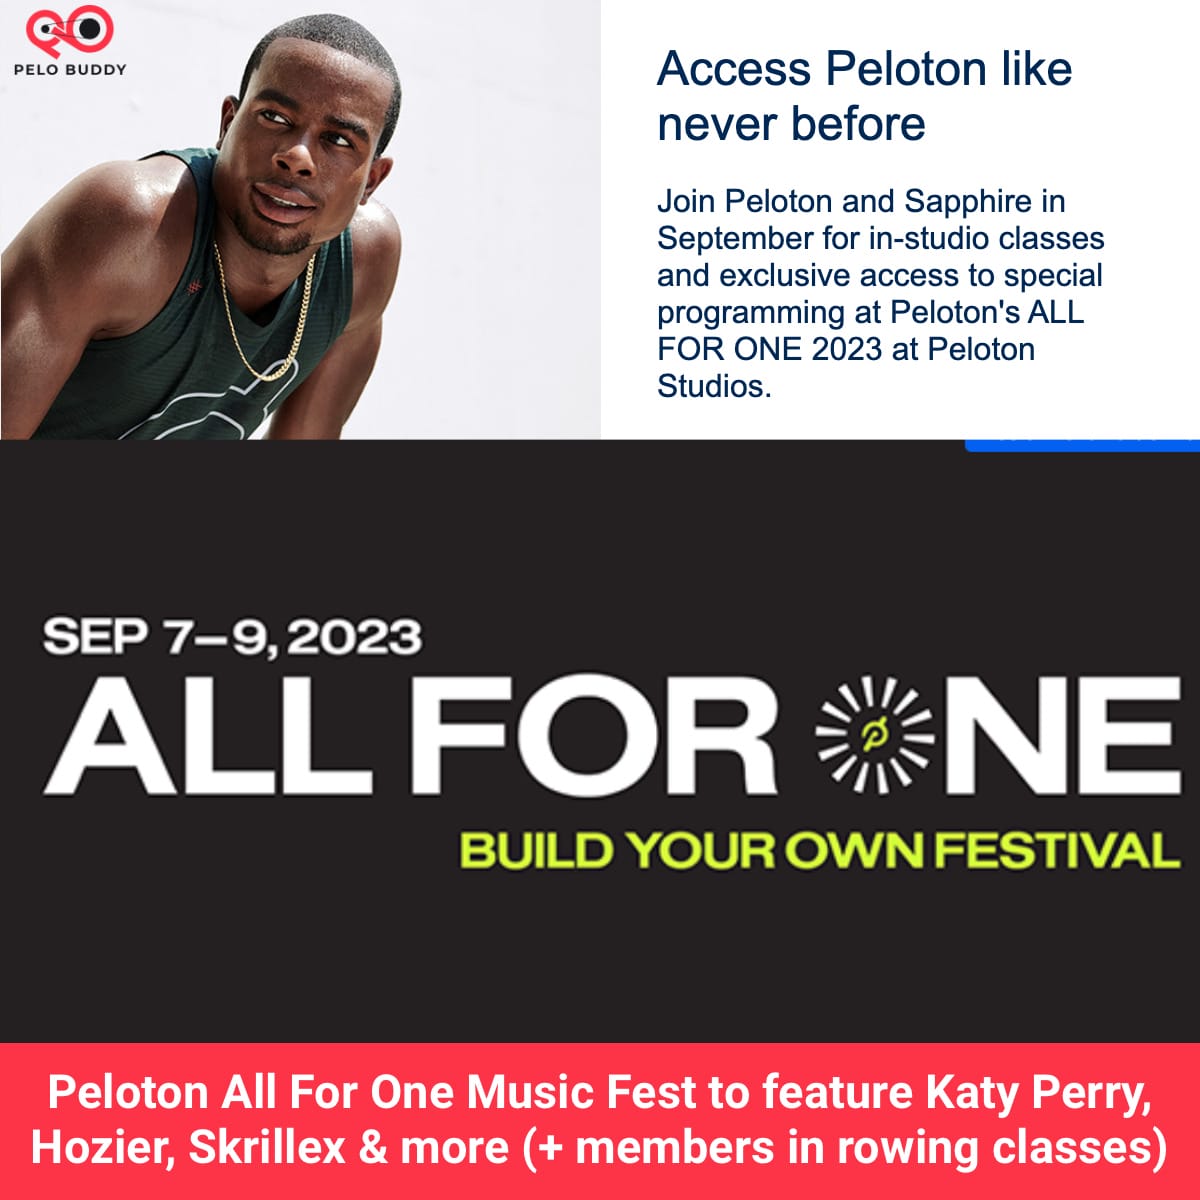 Peloton 2023 All For One Music Festival to Feature Katy Perry